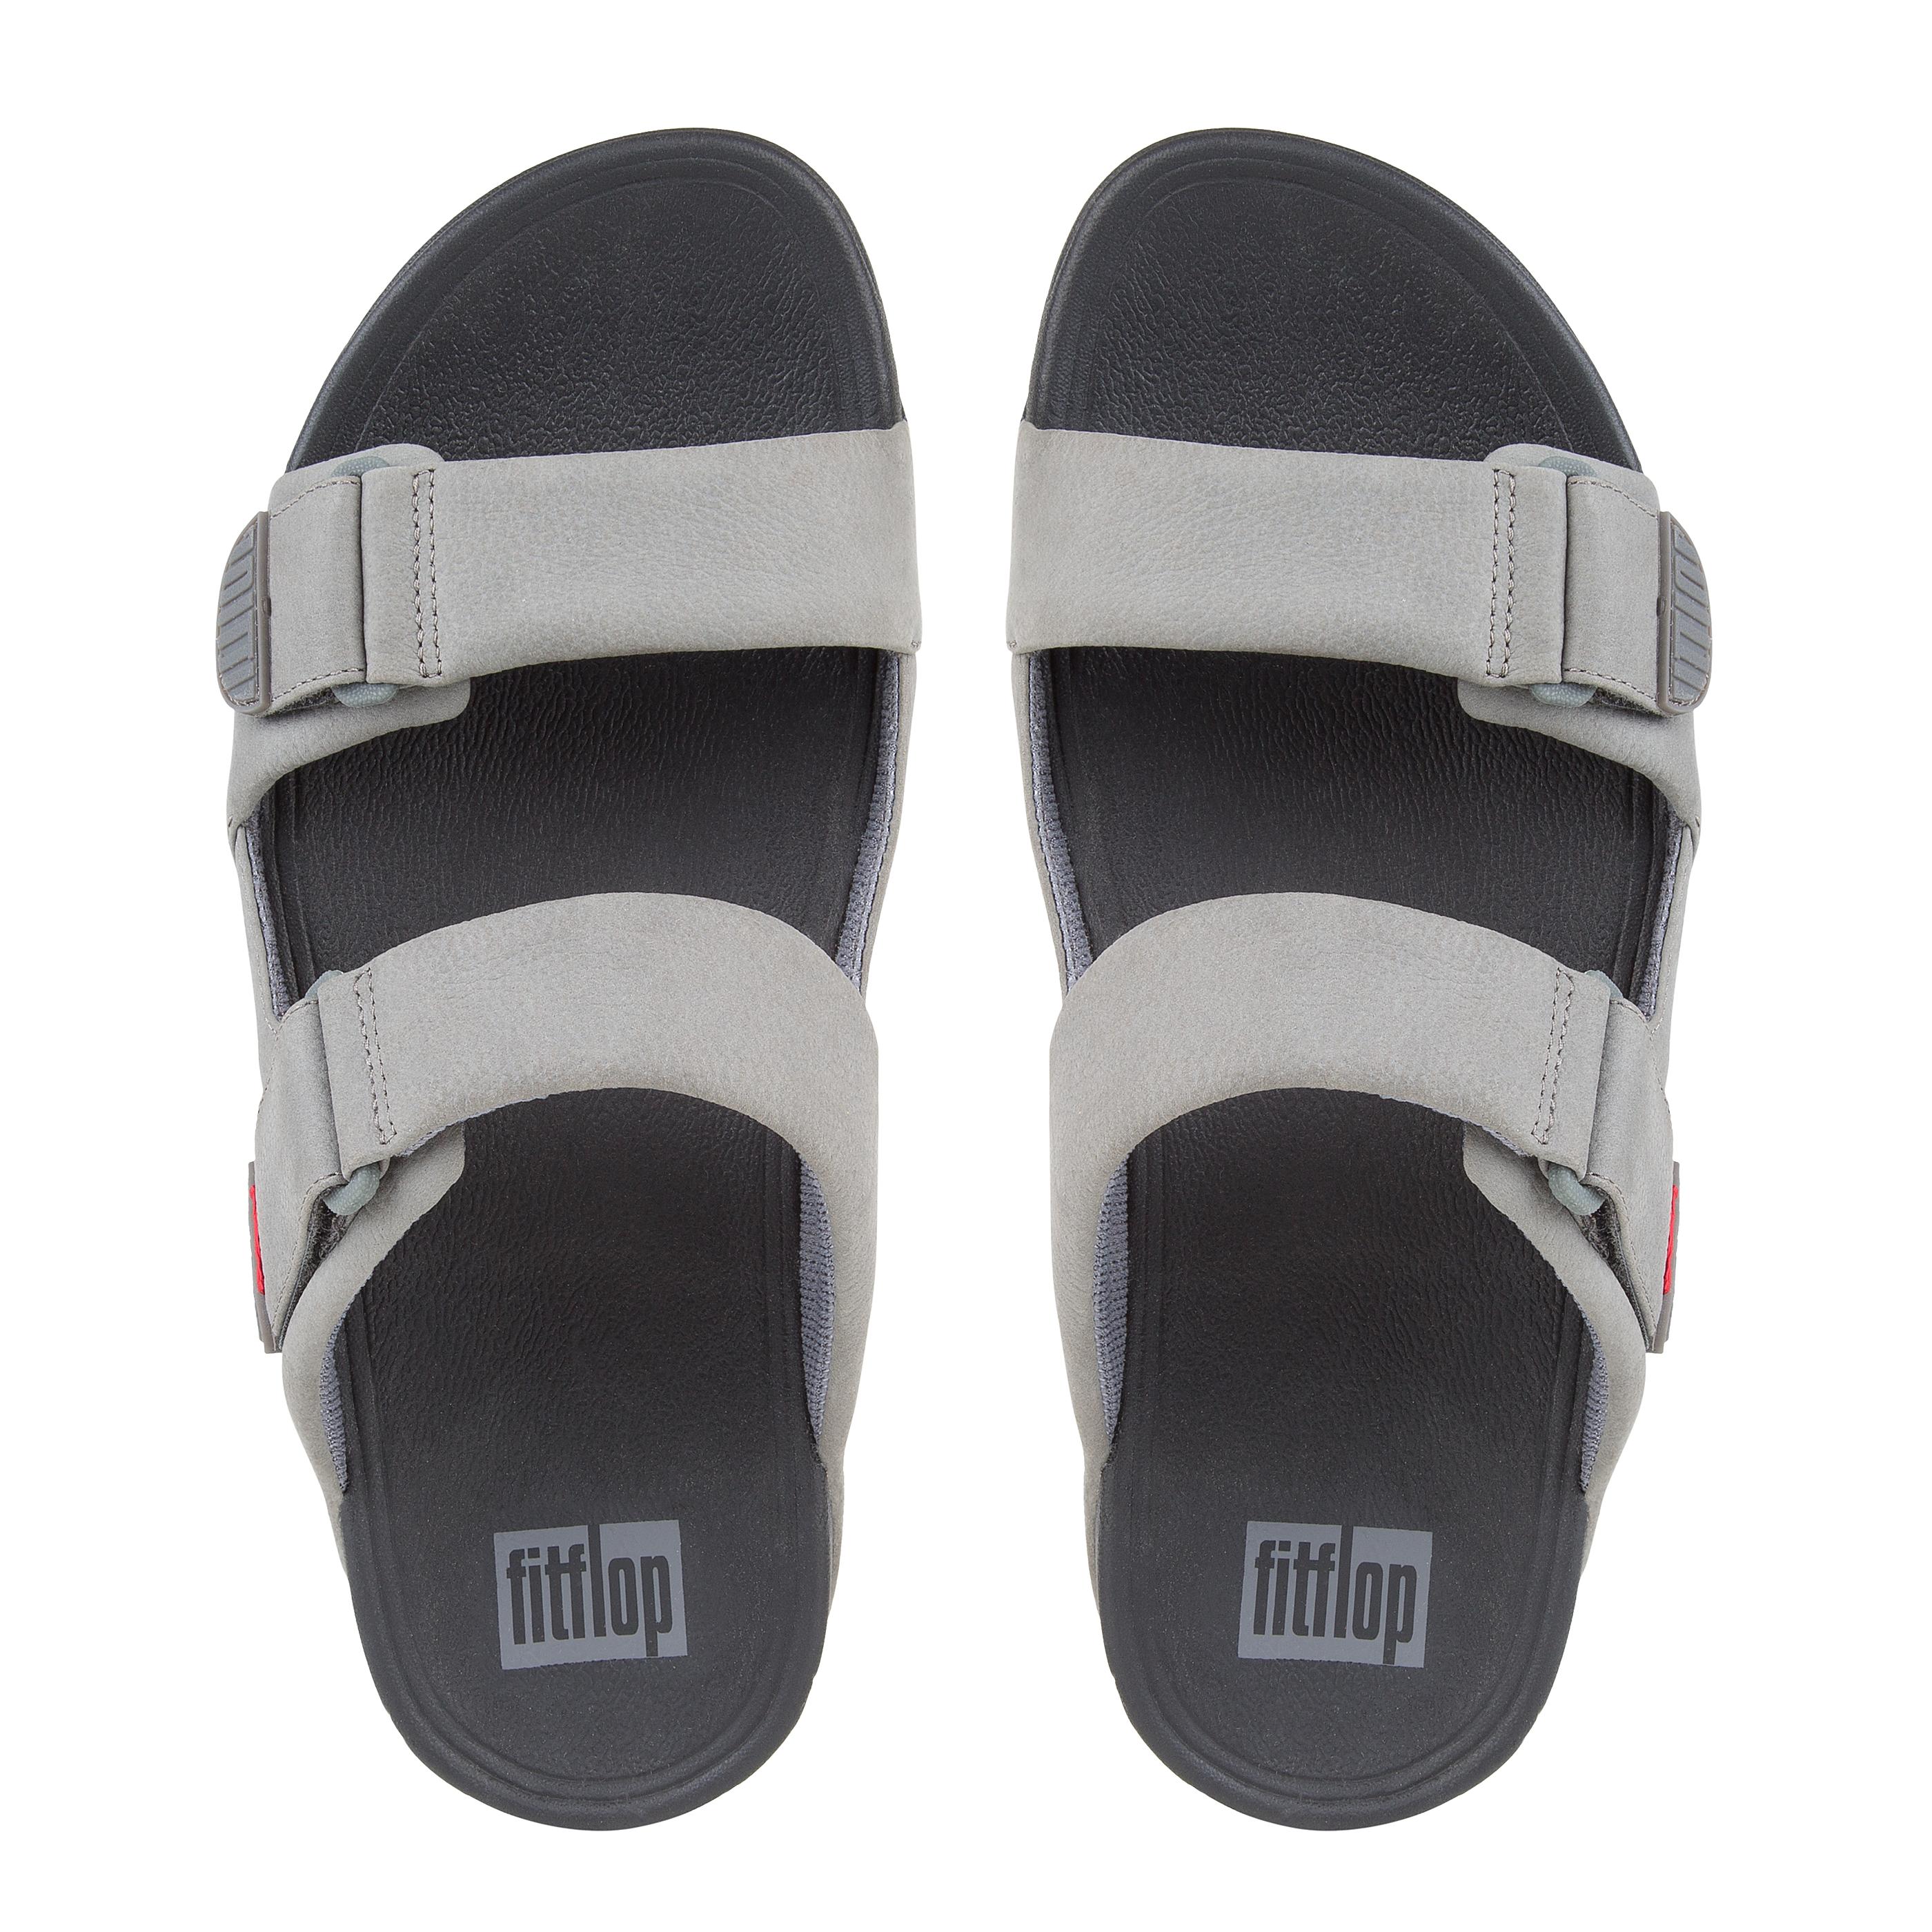 fitflop gogh slide